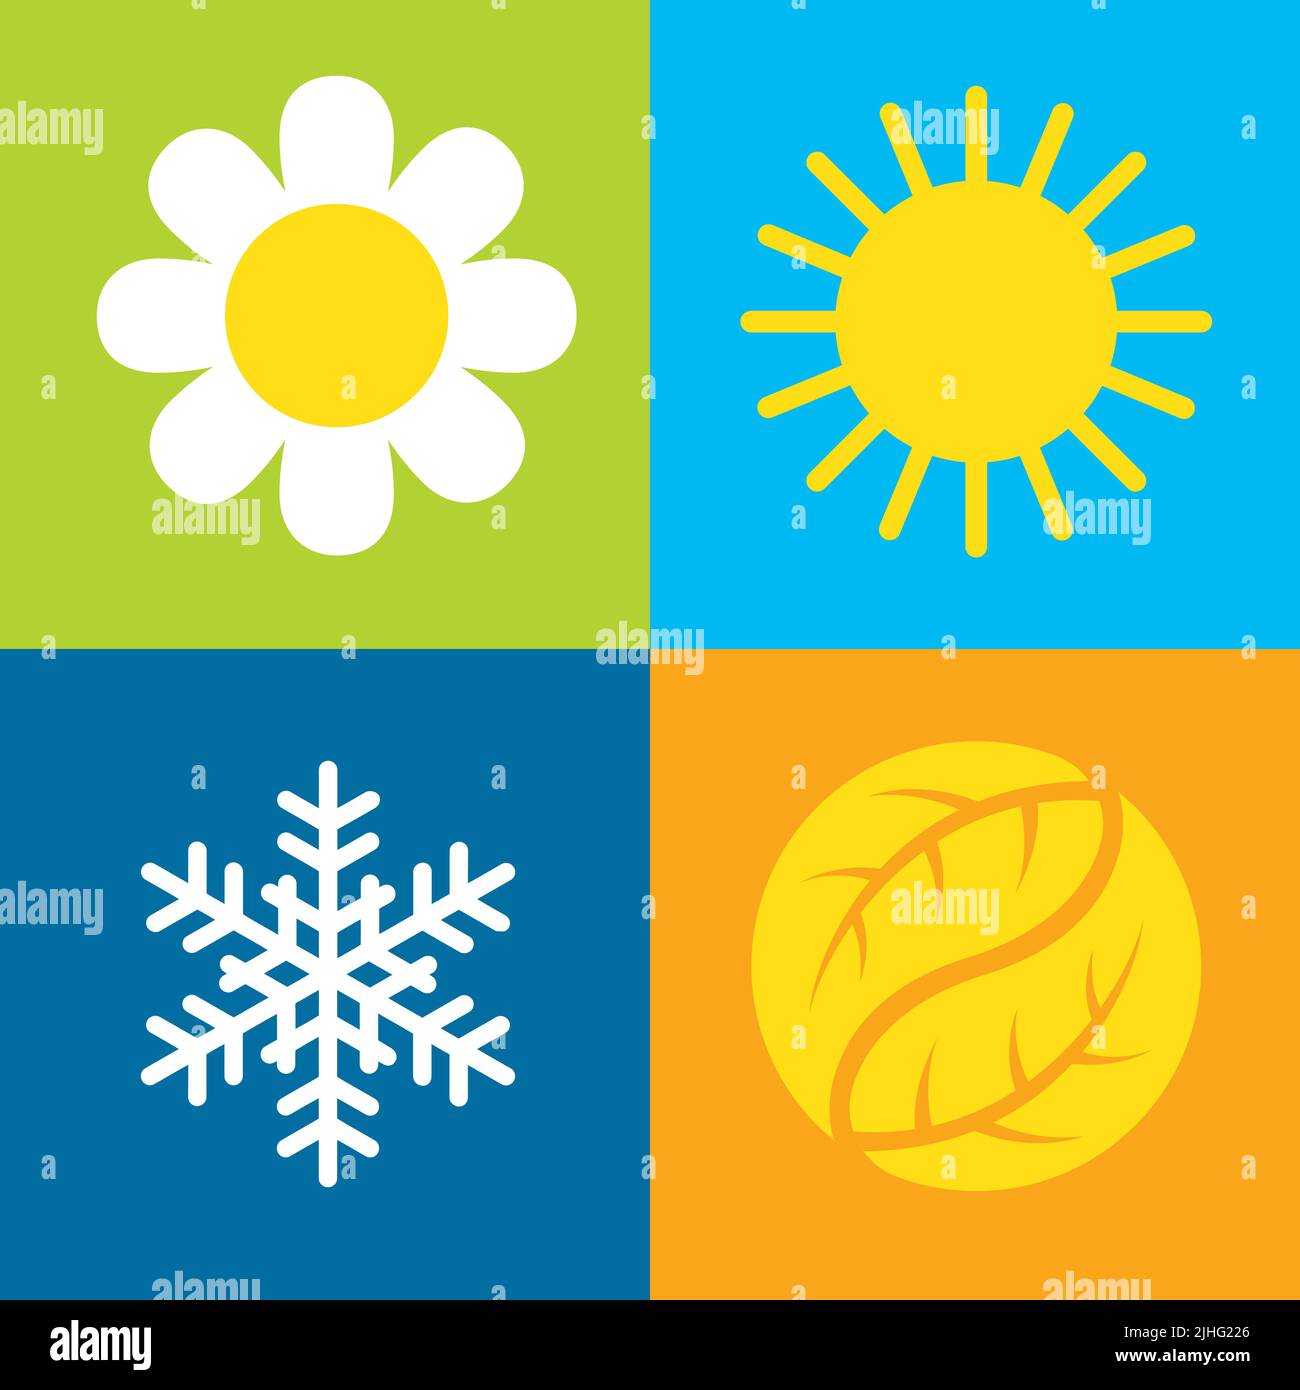 Four seasons vector symbols. Set of four vector icons on colorful backgrounds representing each of the four seasons, spring, summer, autumn, winter. Stock Vector